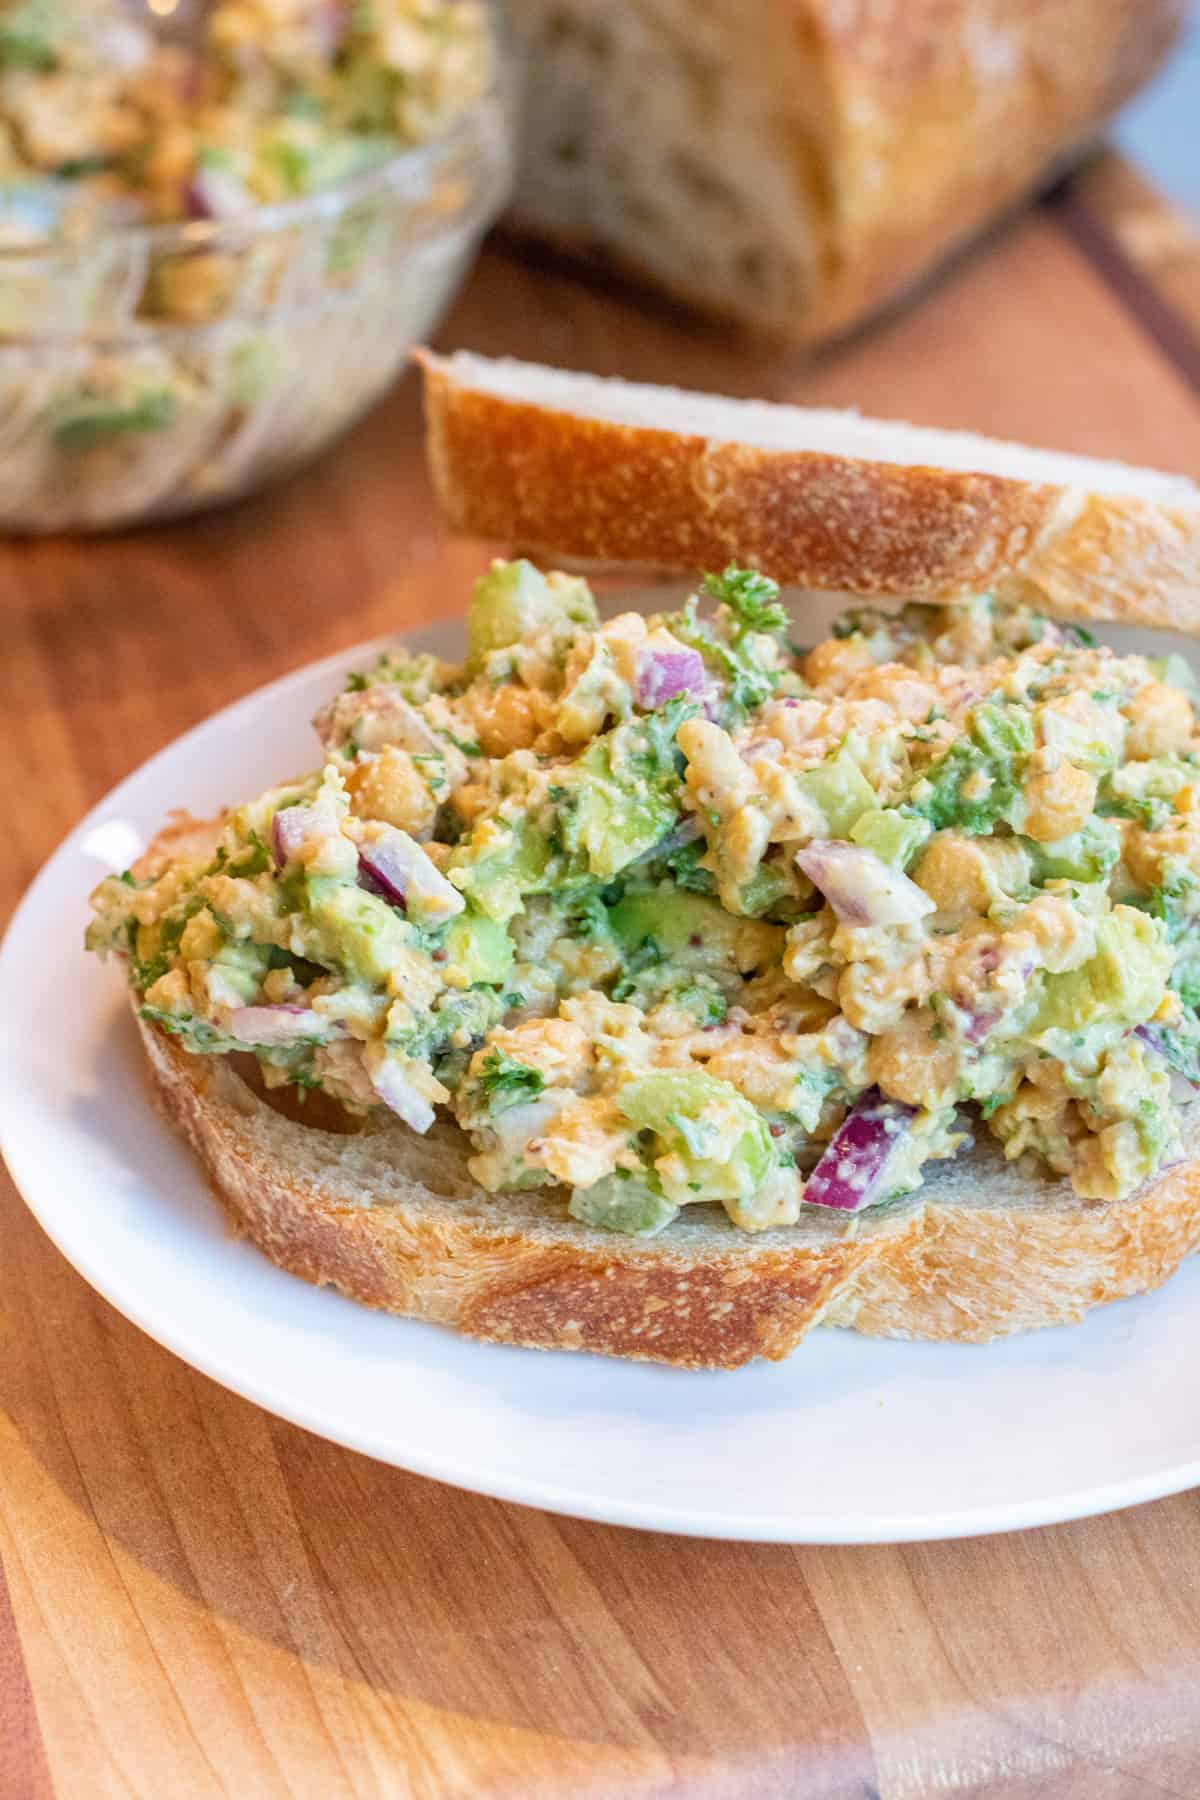 an open sandwich of chickpea avocado salad on a plate.